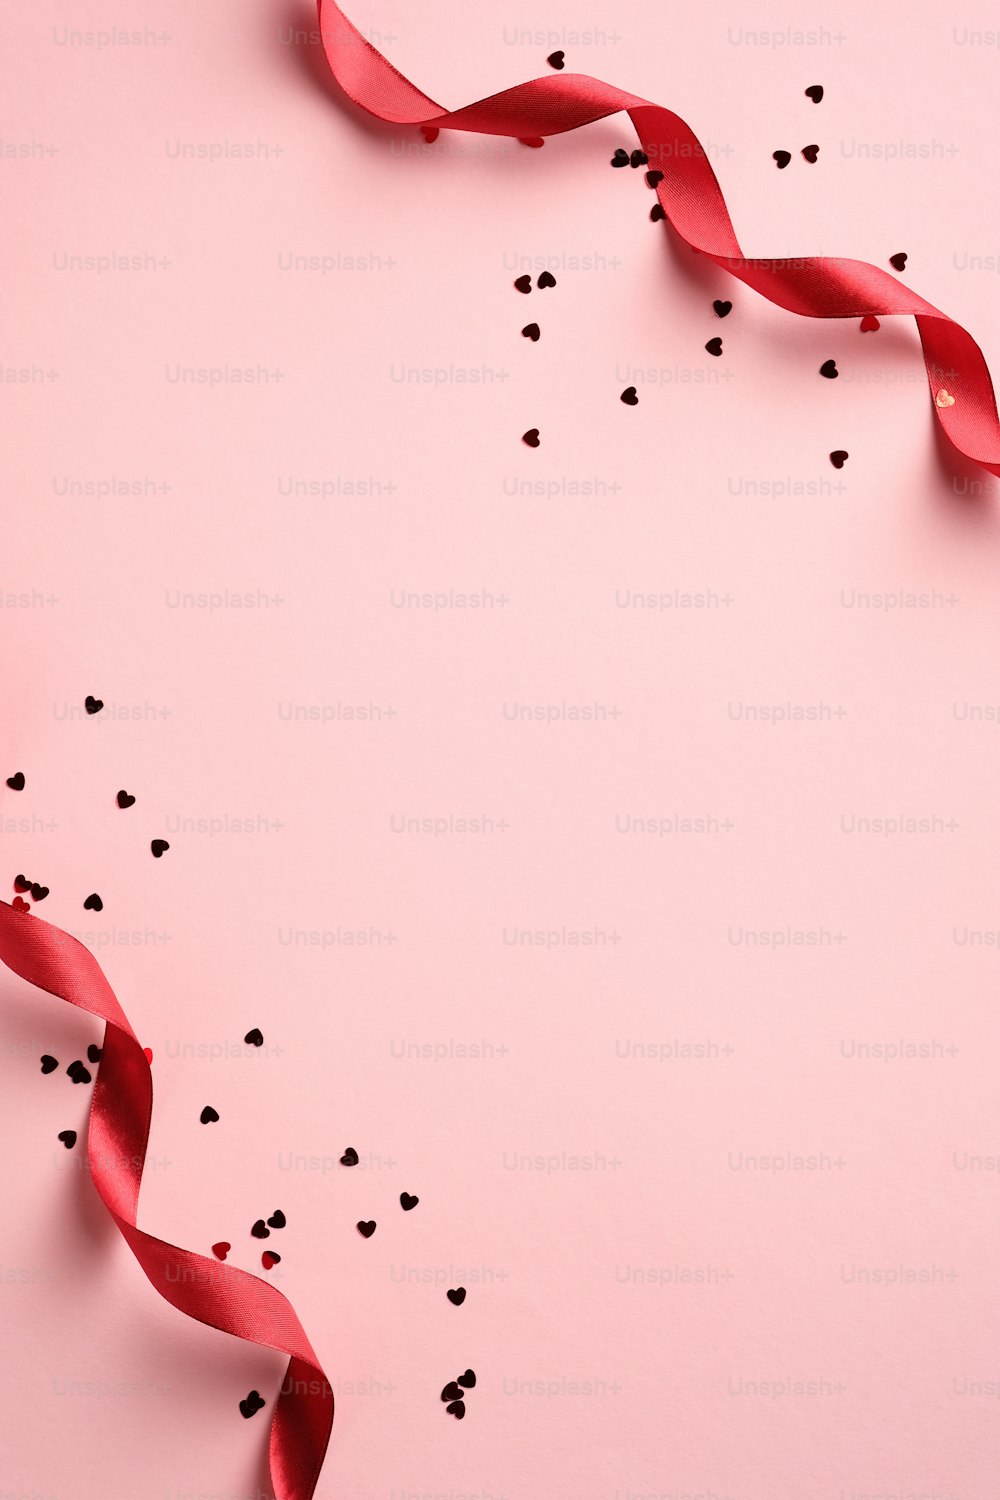 Happy Valentine's Day concept. Vertical banner design with red ribbons and heart shaped confetti on pink background. Holiday brochure design, greeting card, gift voucher template. Minimal style.